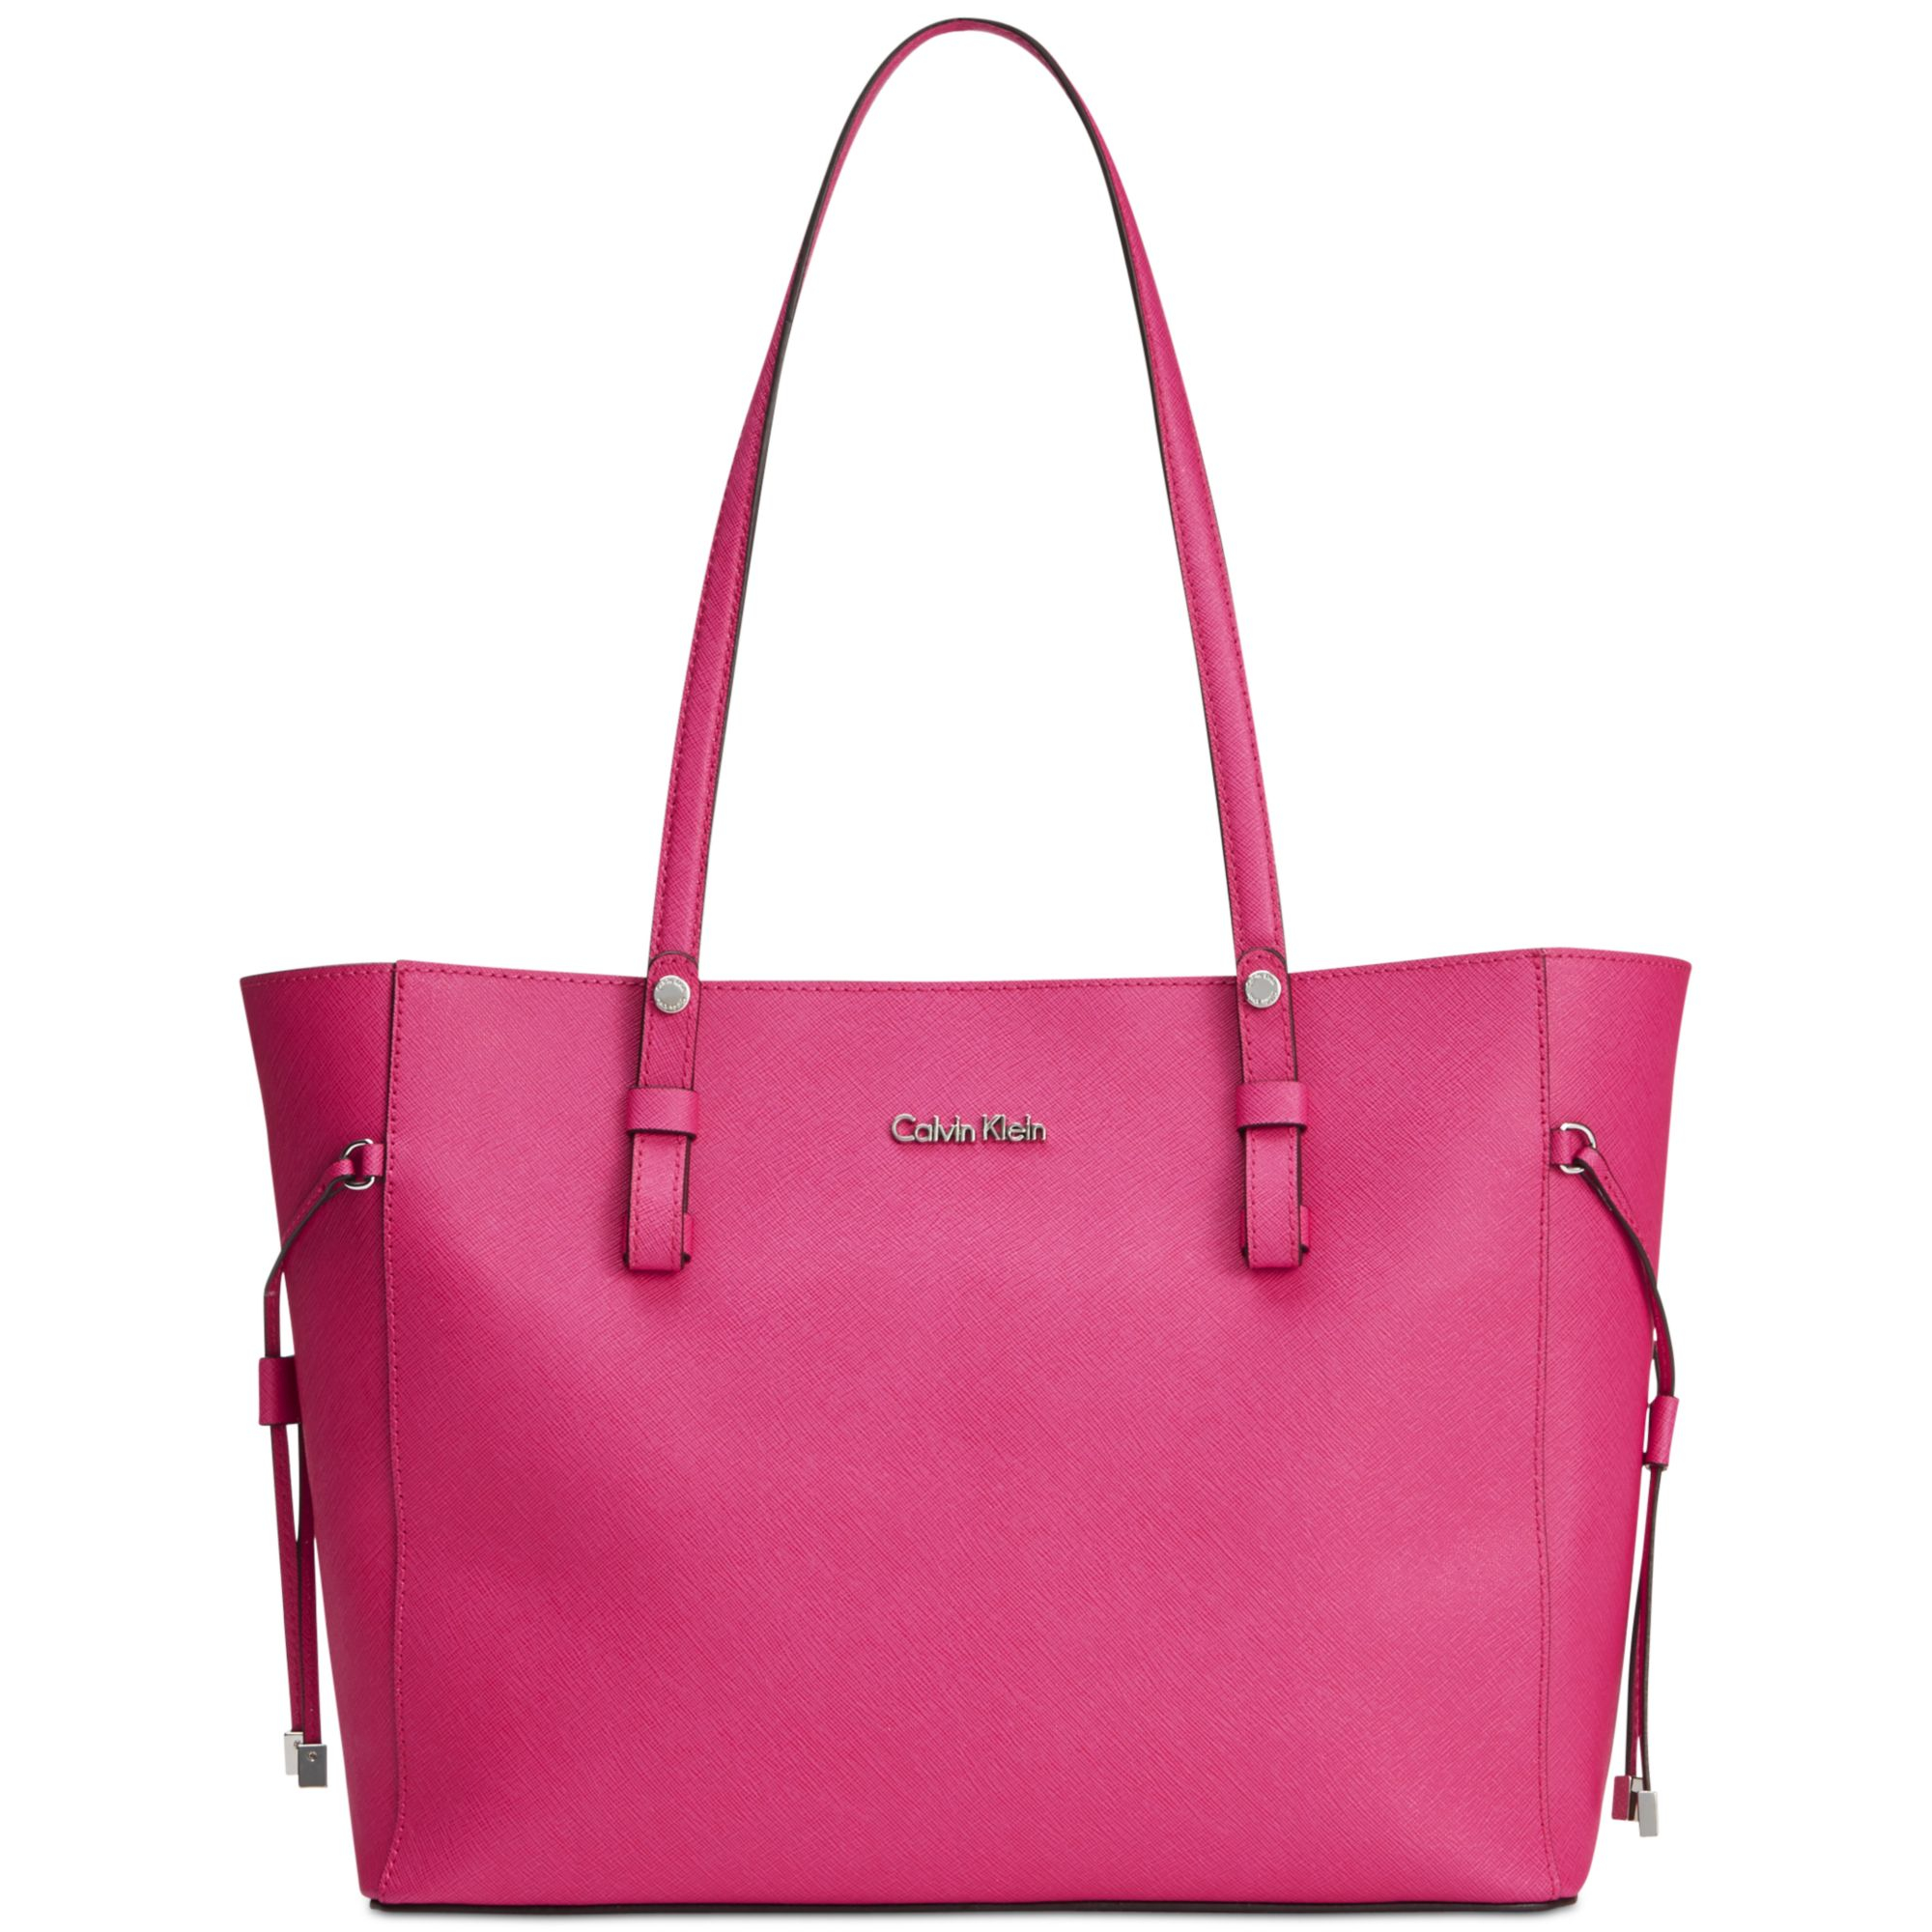 Calvin Klein Saffiano Leather Drawstring Tote in Pink (Punch) | Lyst